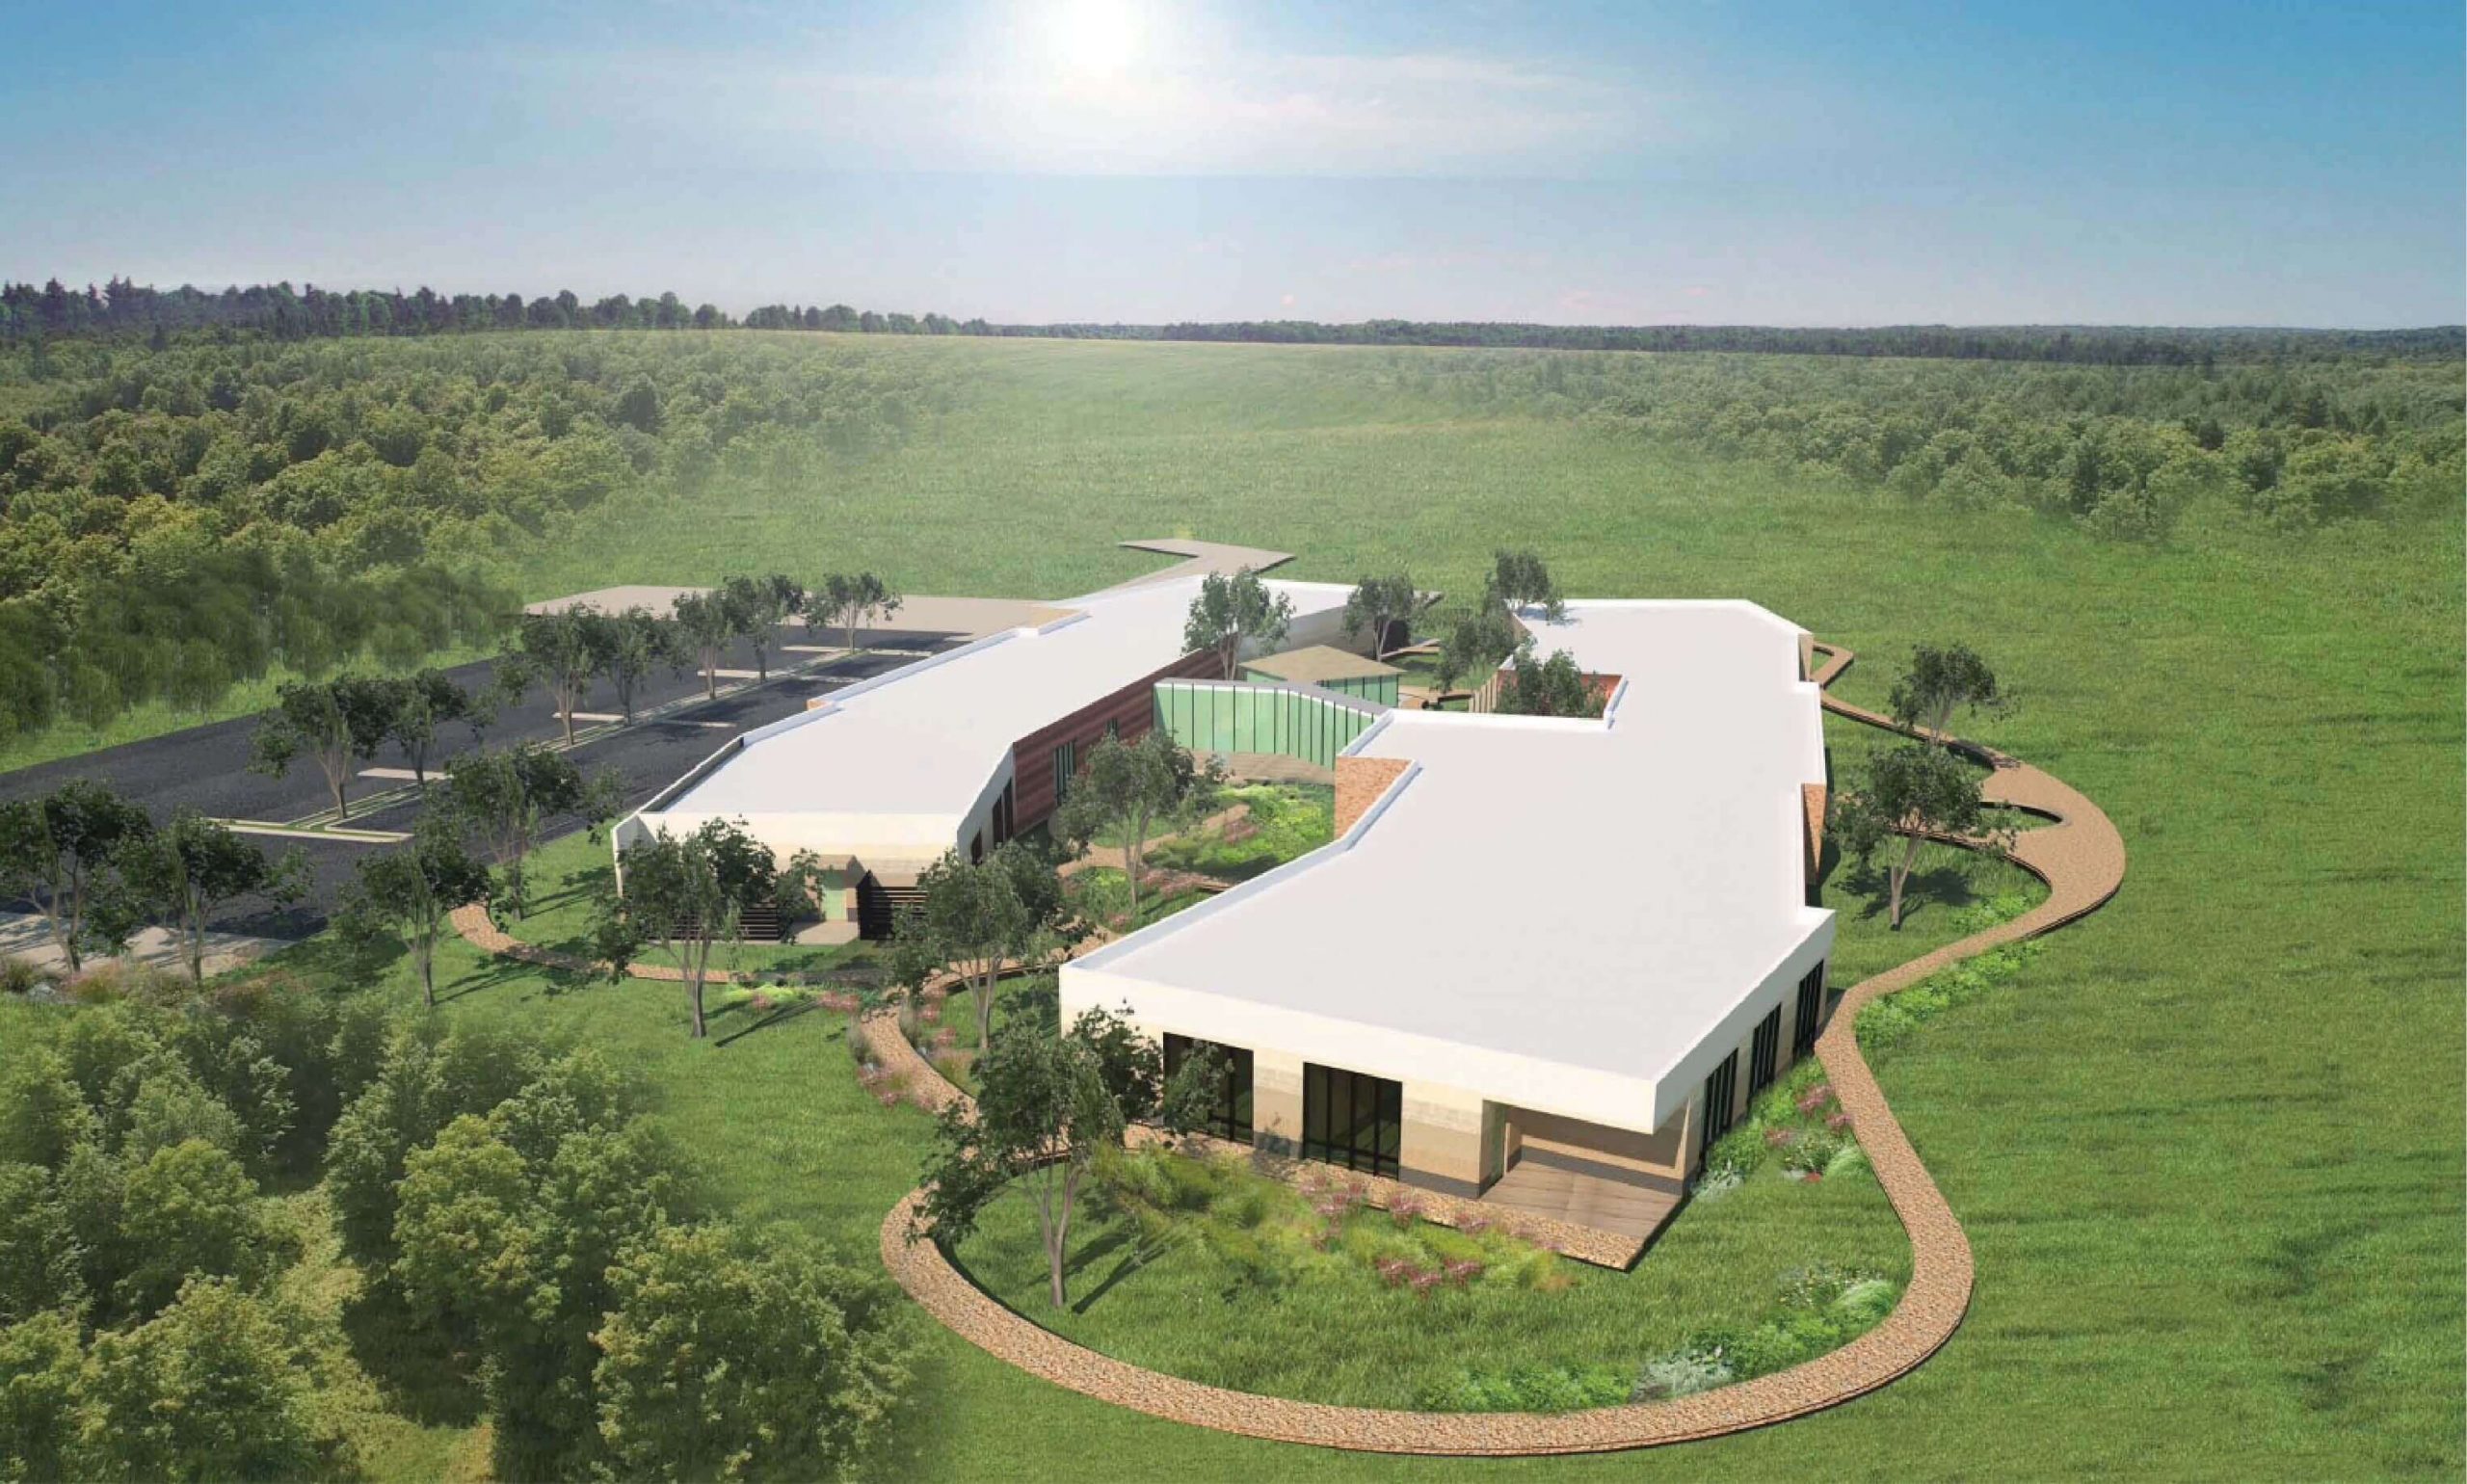 Artists impression of the new Anam Cara building and grounds